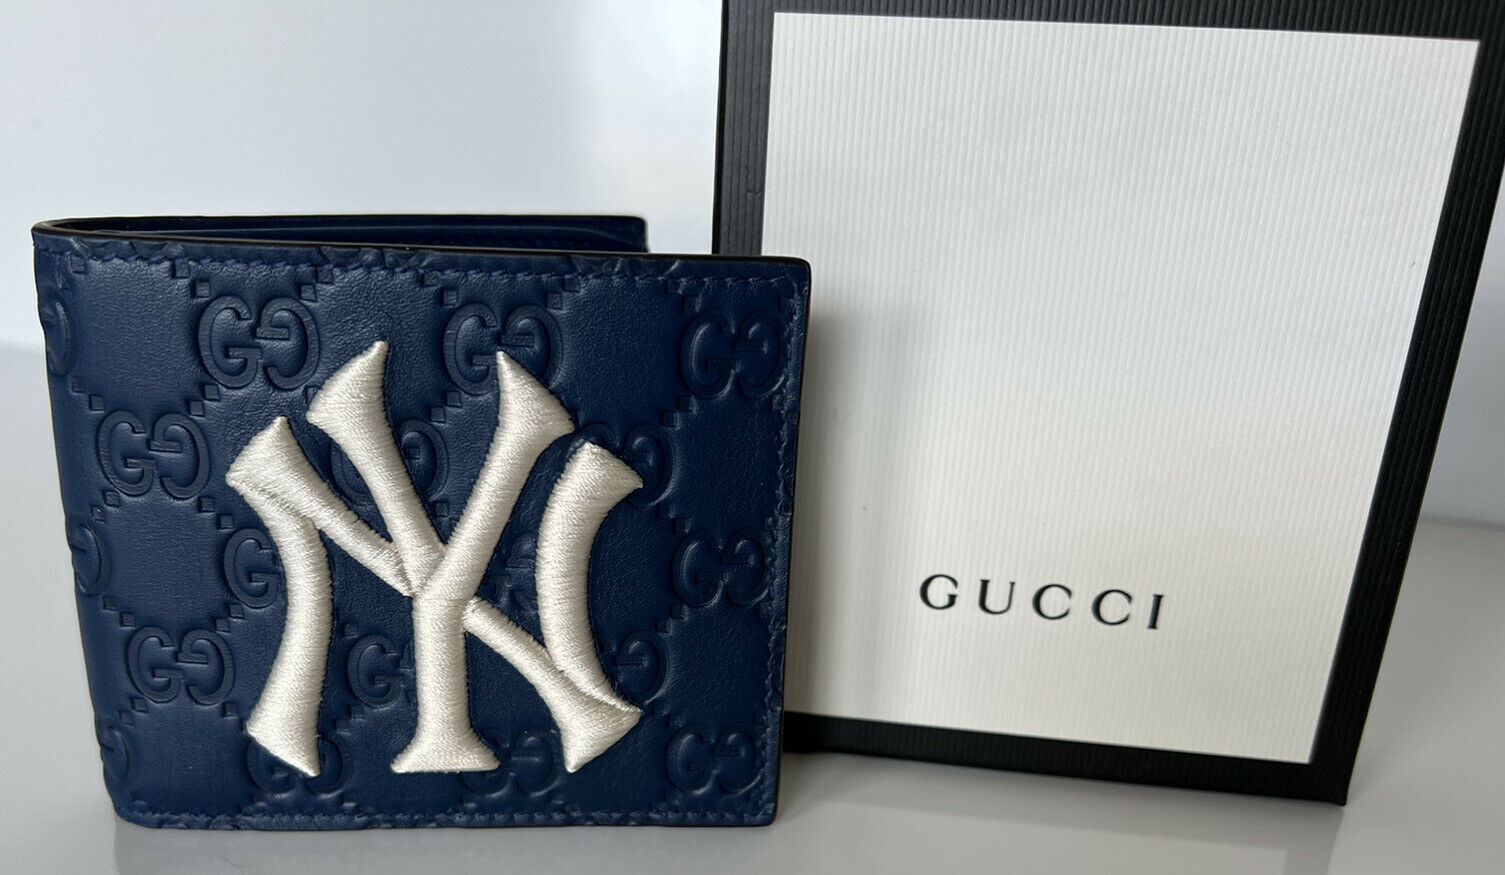 New Gucci GG NY Yankees Bifold Leather Wallet Blue Made in Italy 547787